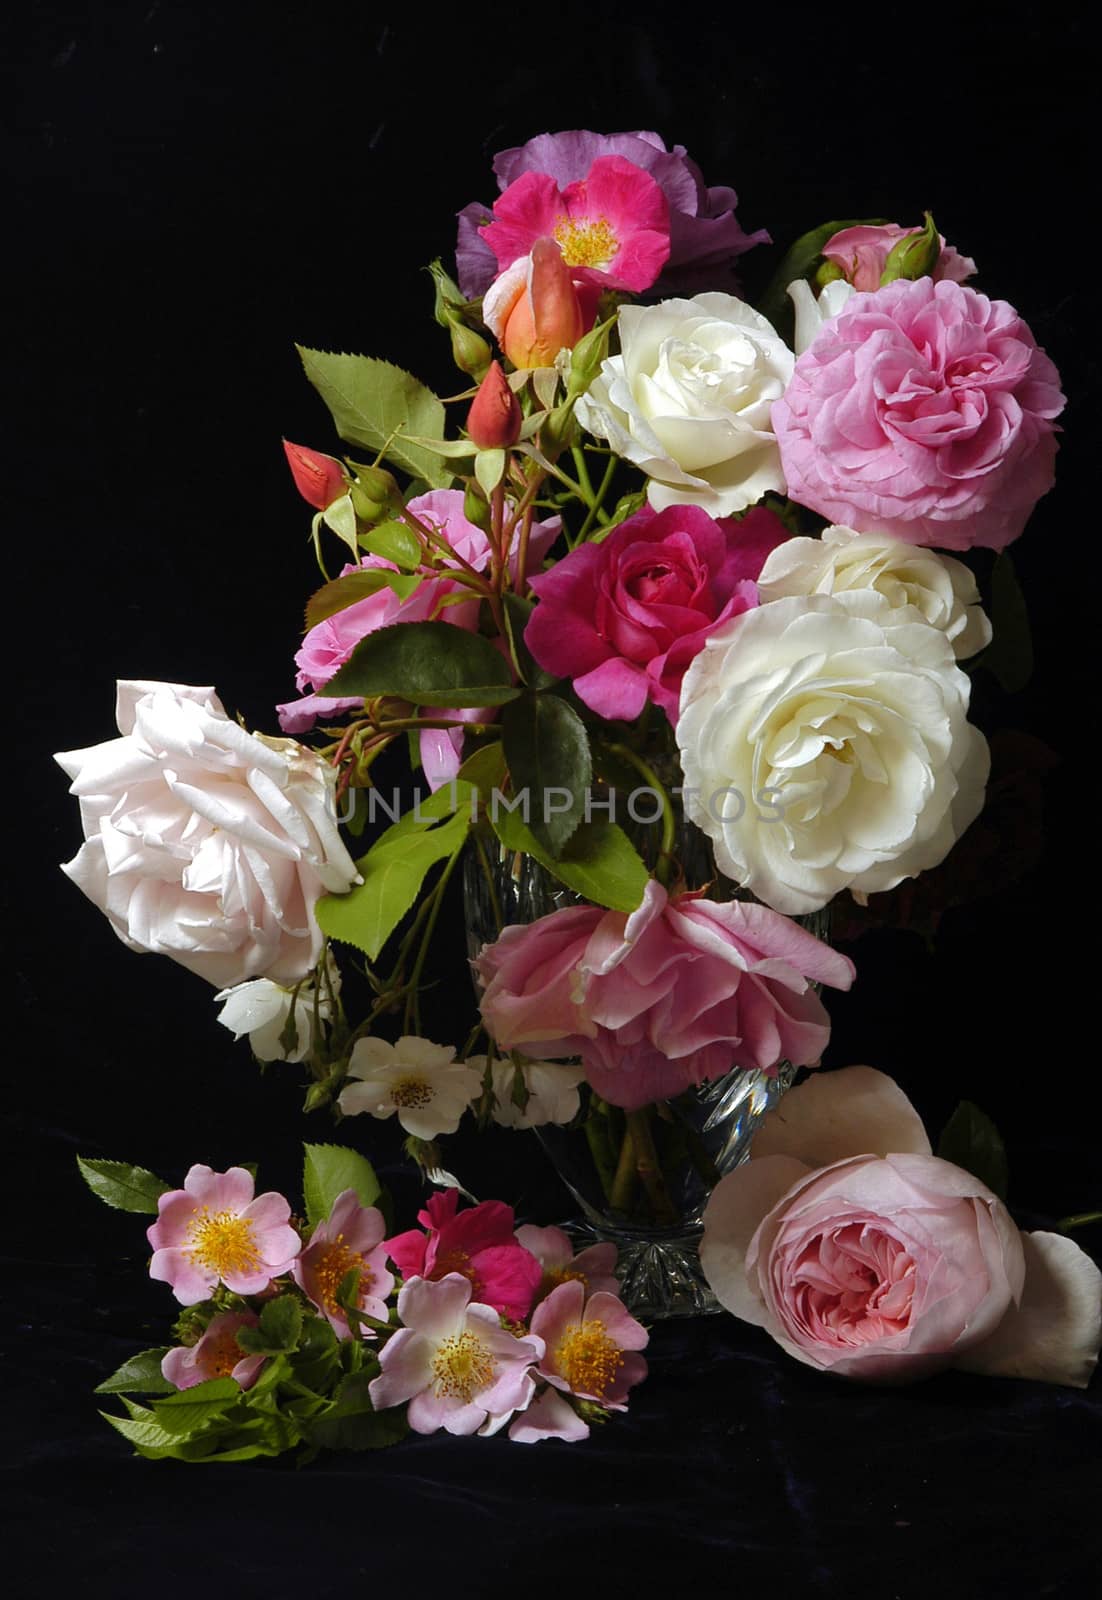 Beautifully presented and photographed florals in the Studio.